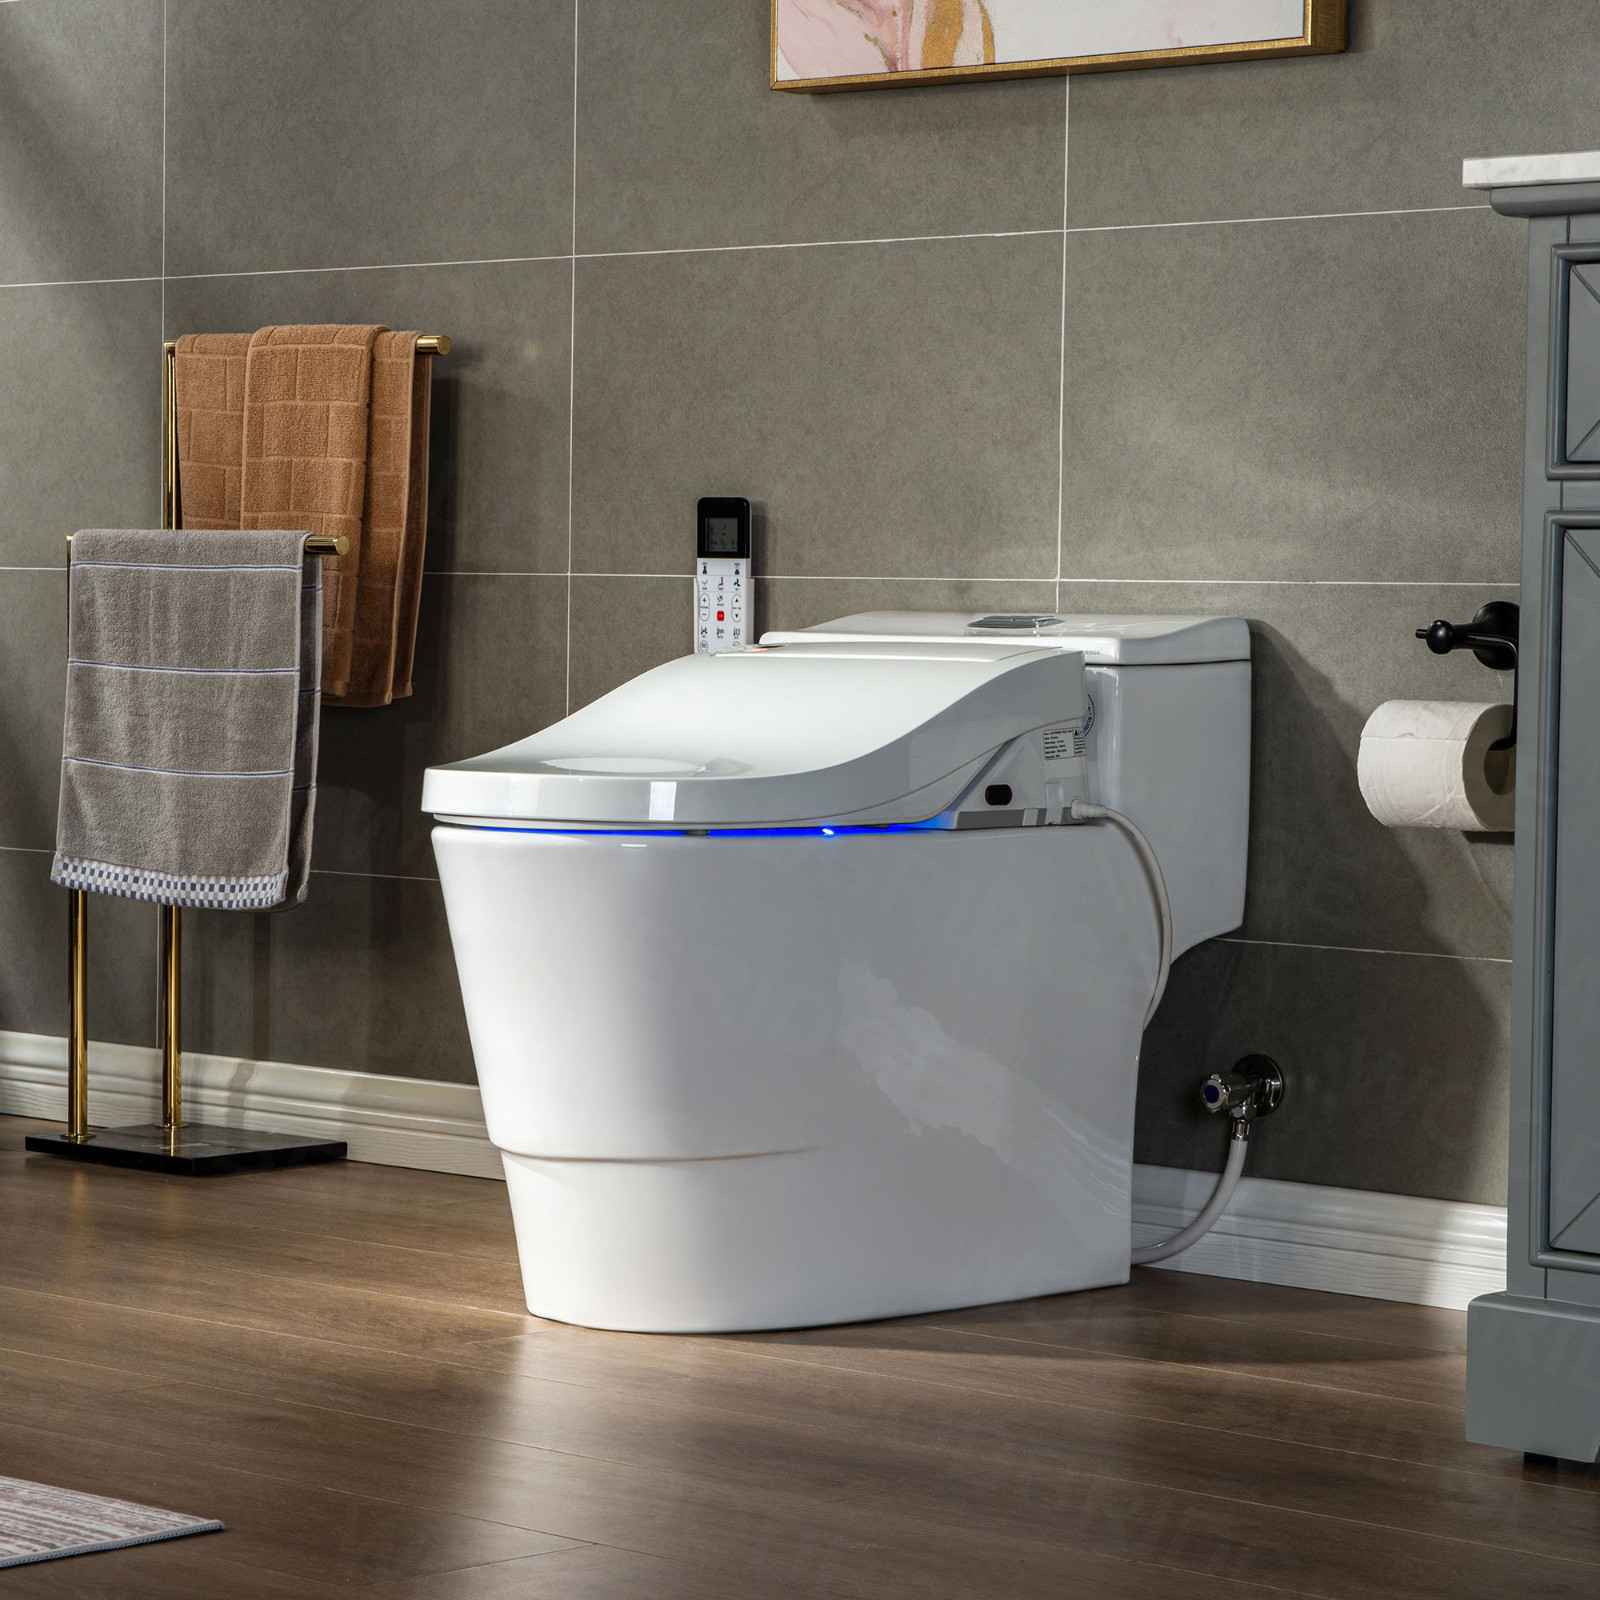  WOODBRIDGE Toilet & Bidet Luxury Elongated One Piece Advanced Smart Seat with Temperature Controlled Wash Functions and Air Dryer, Toilet with Bidet. T-0737, Bidet & Toilet_9718